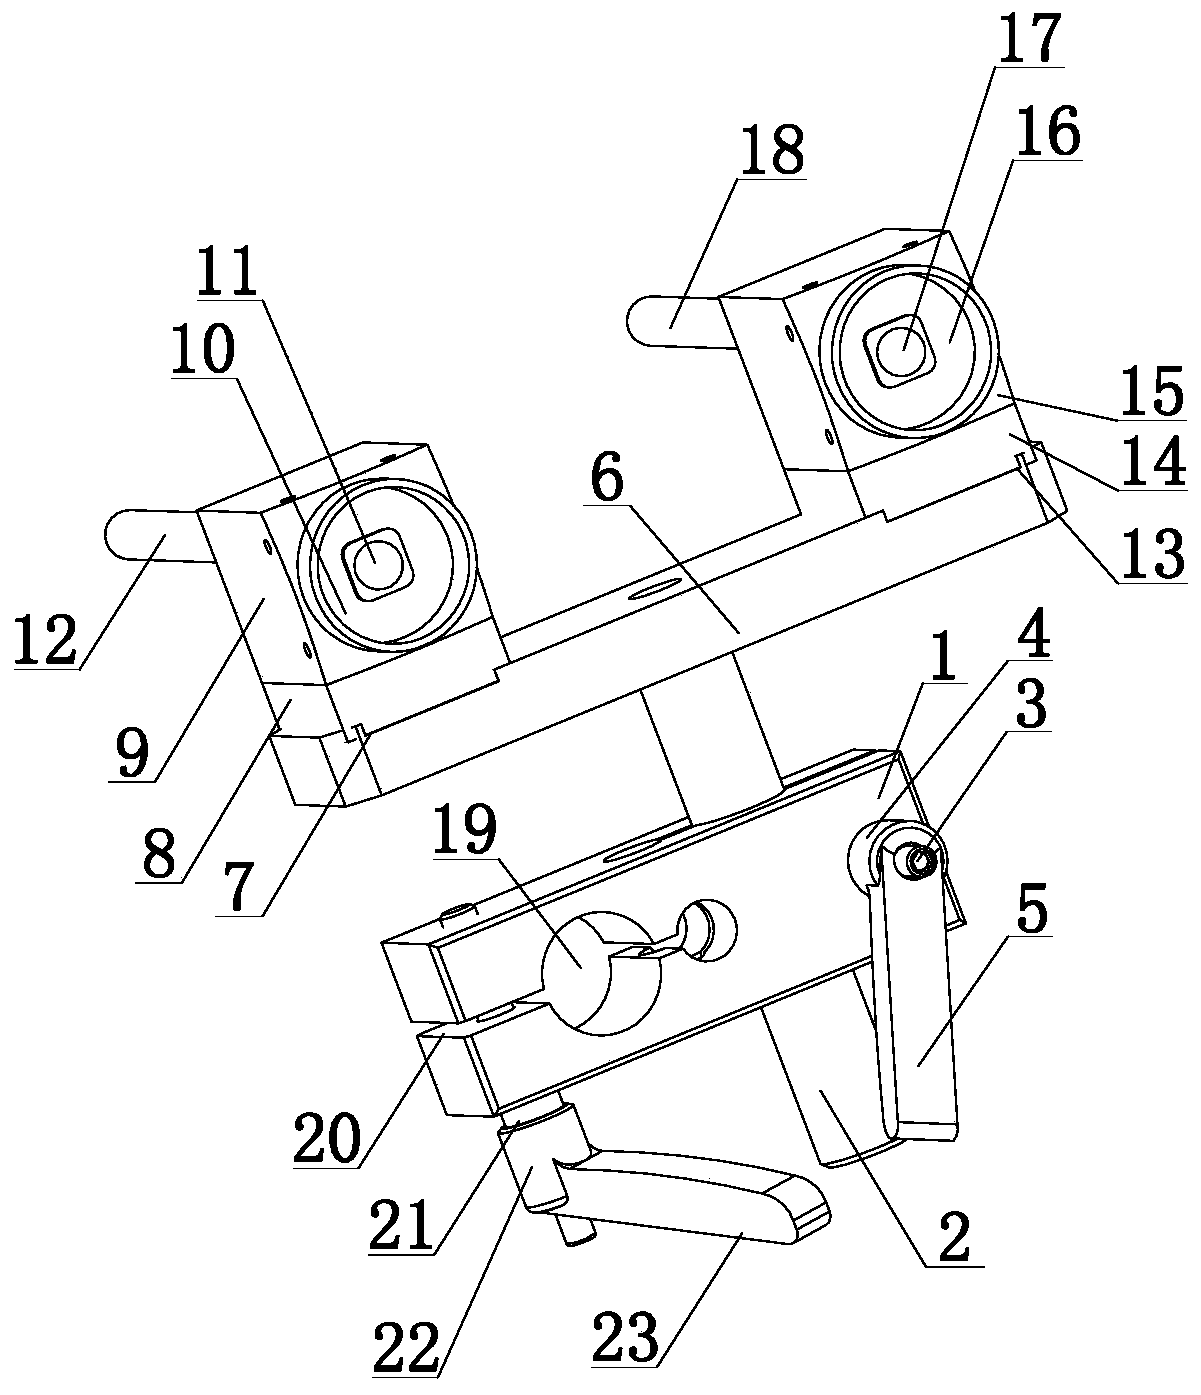 Traction roller lifting and locking device for aluminum foil paper